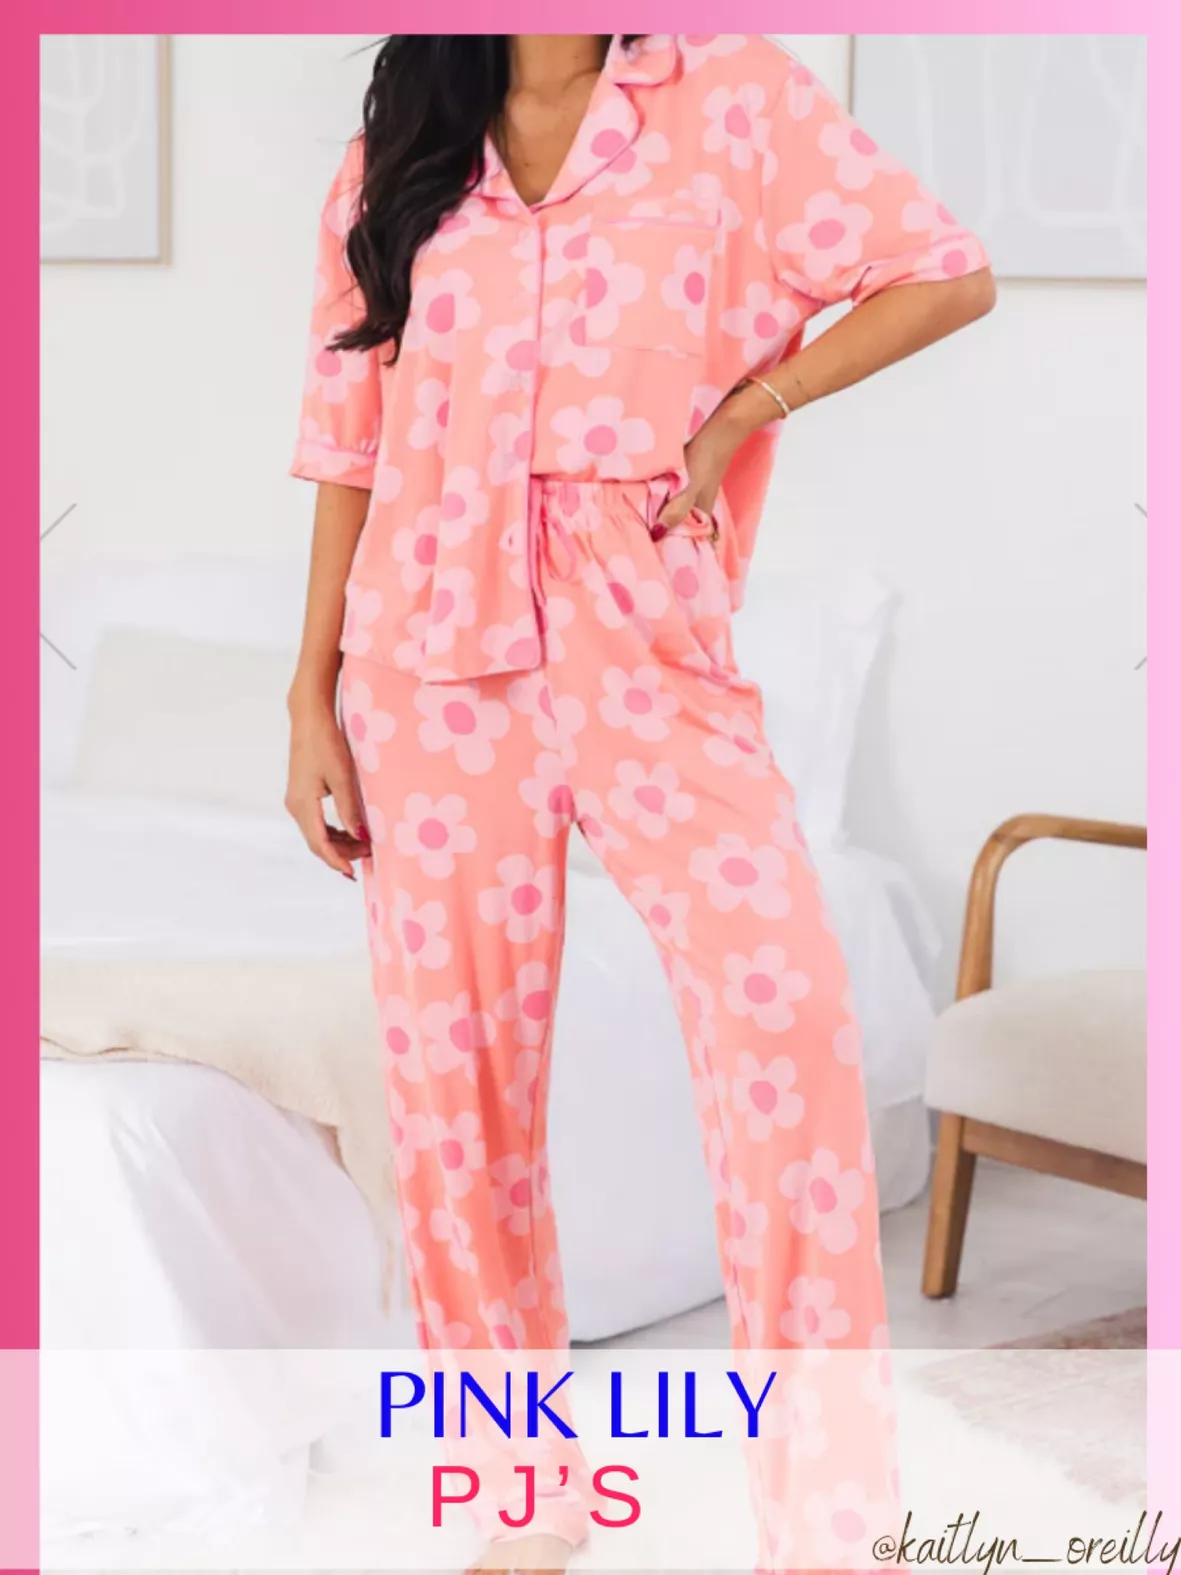 In Love With Me Orange And Pink Floral Pajama Top – Pink Lily